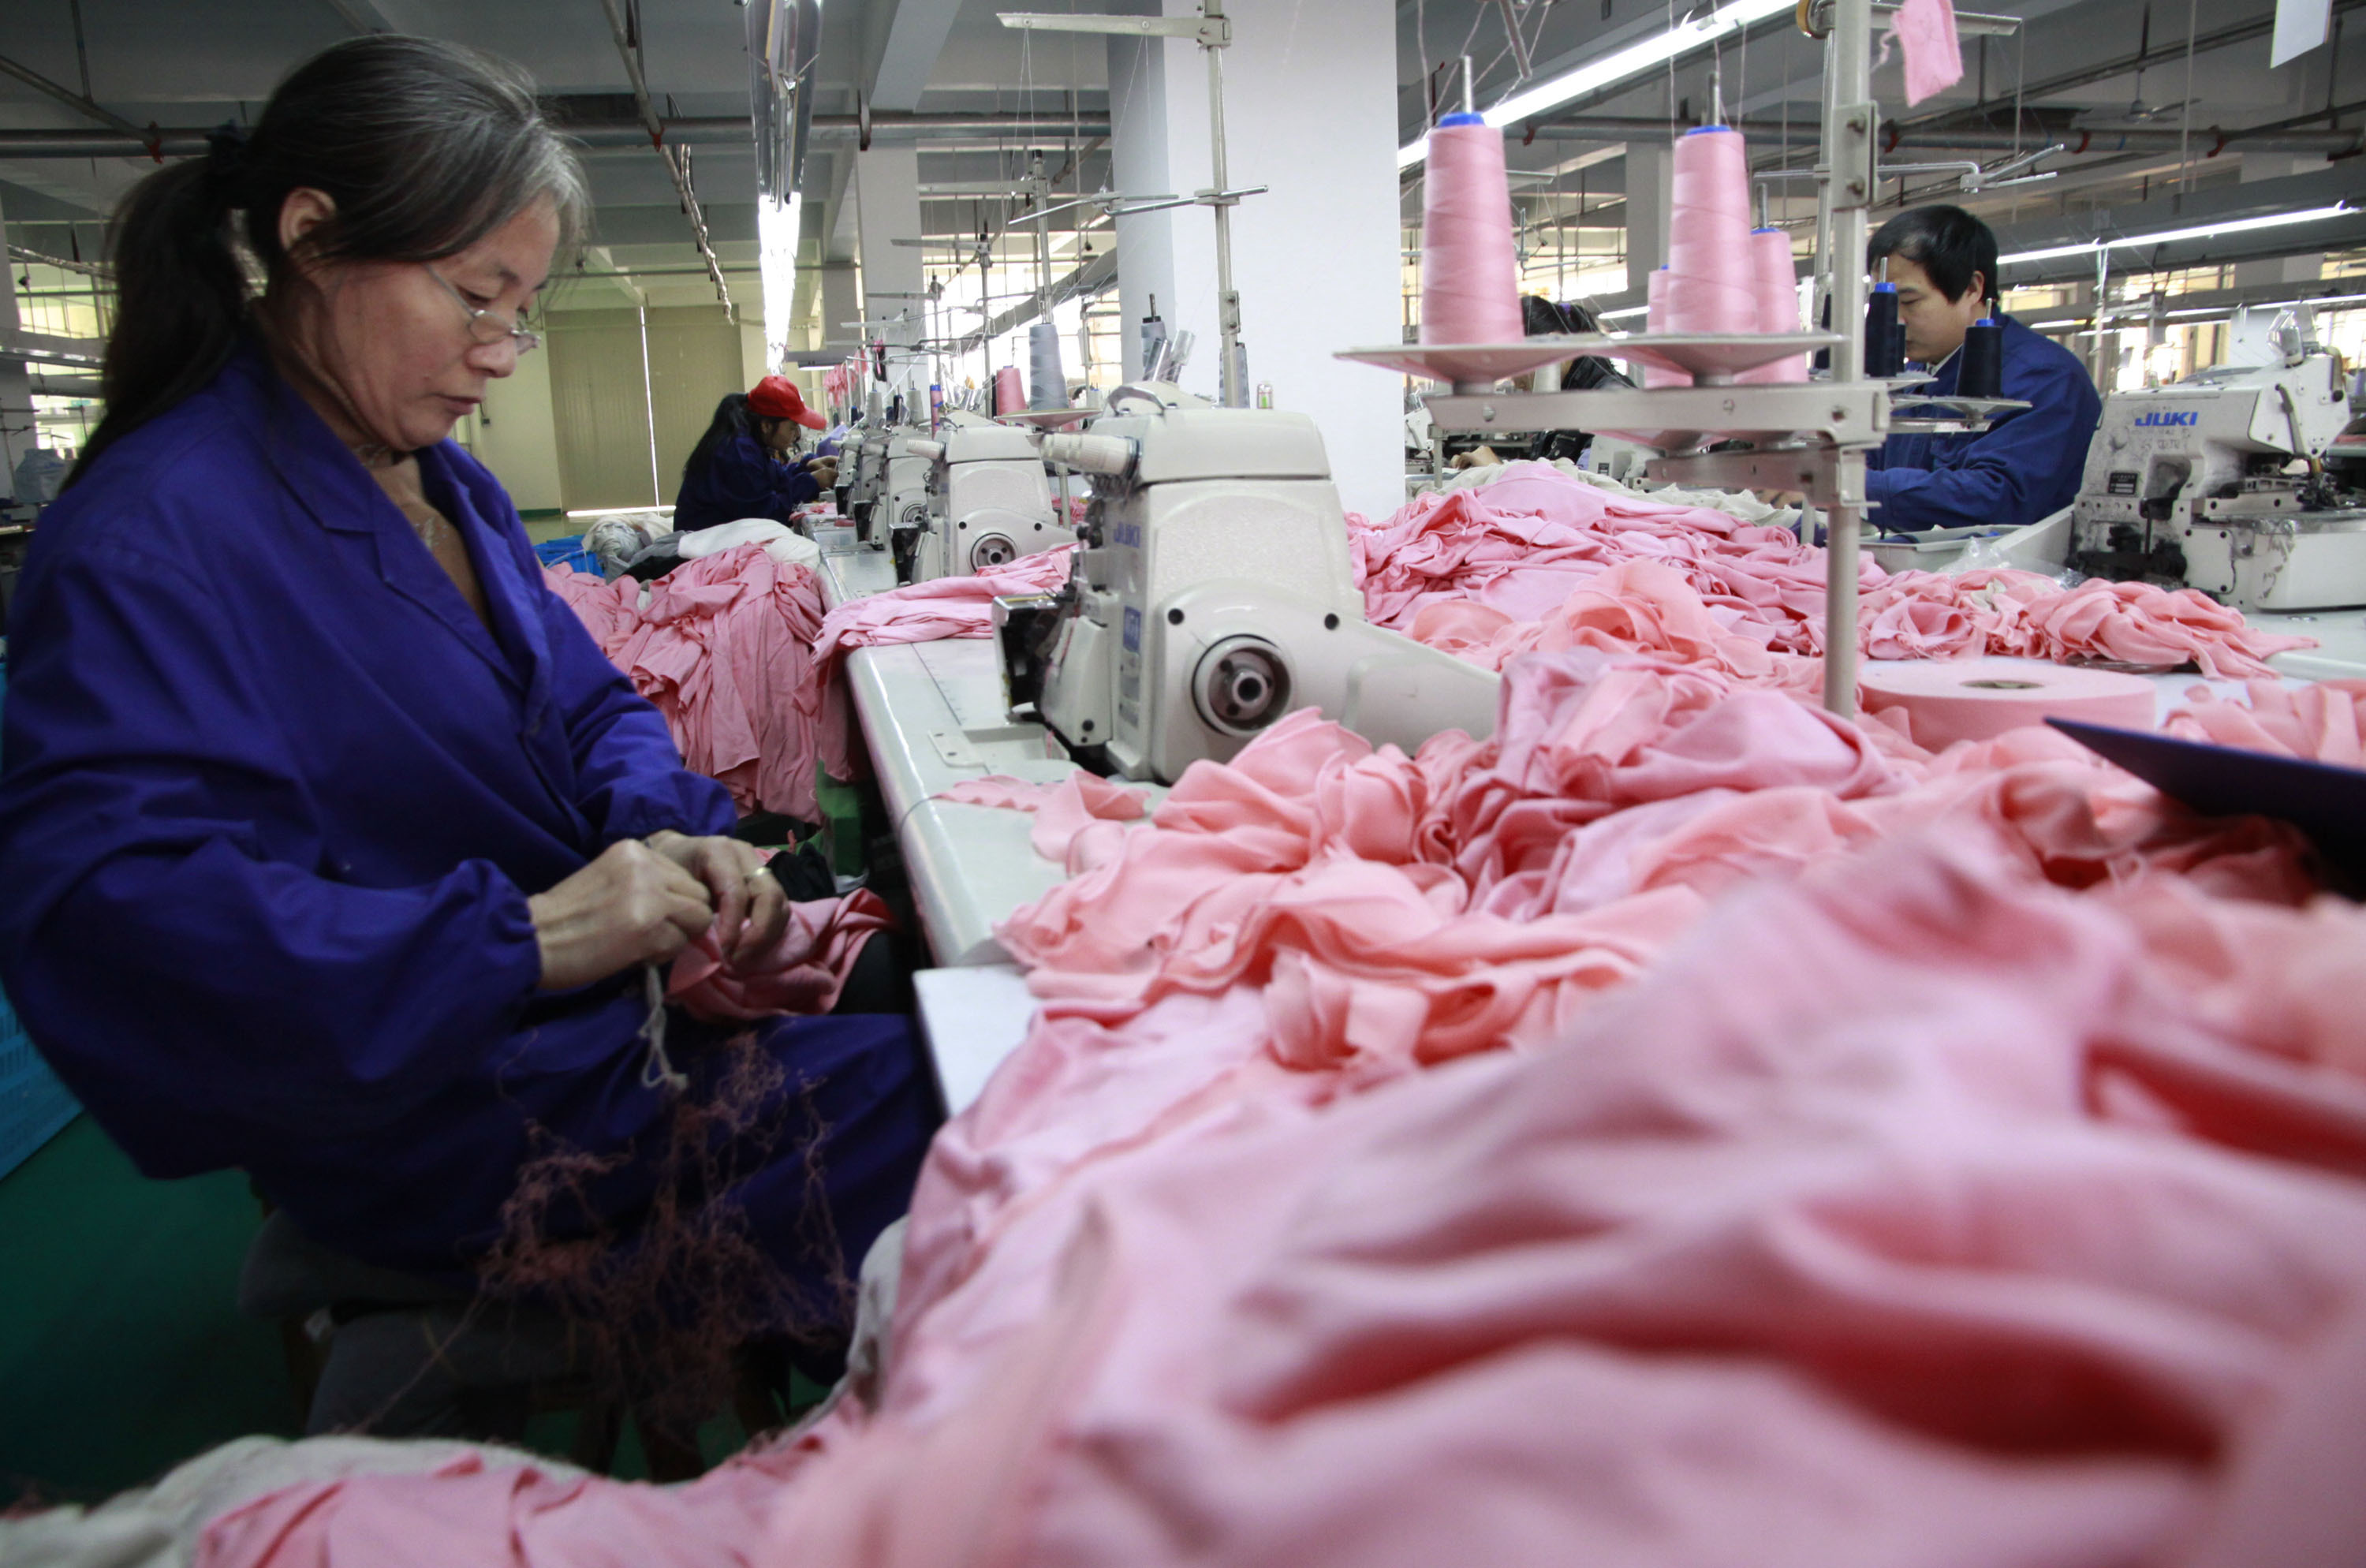 An older garment worker sews pink cloth in a factory